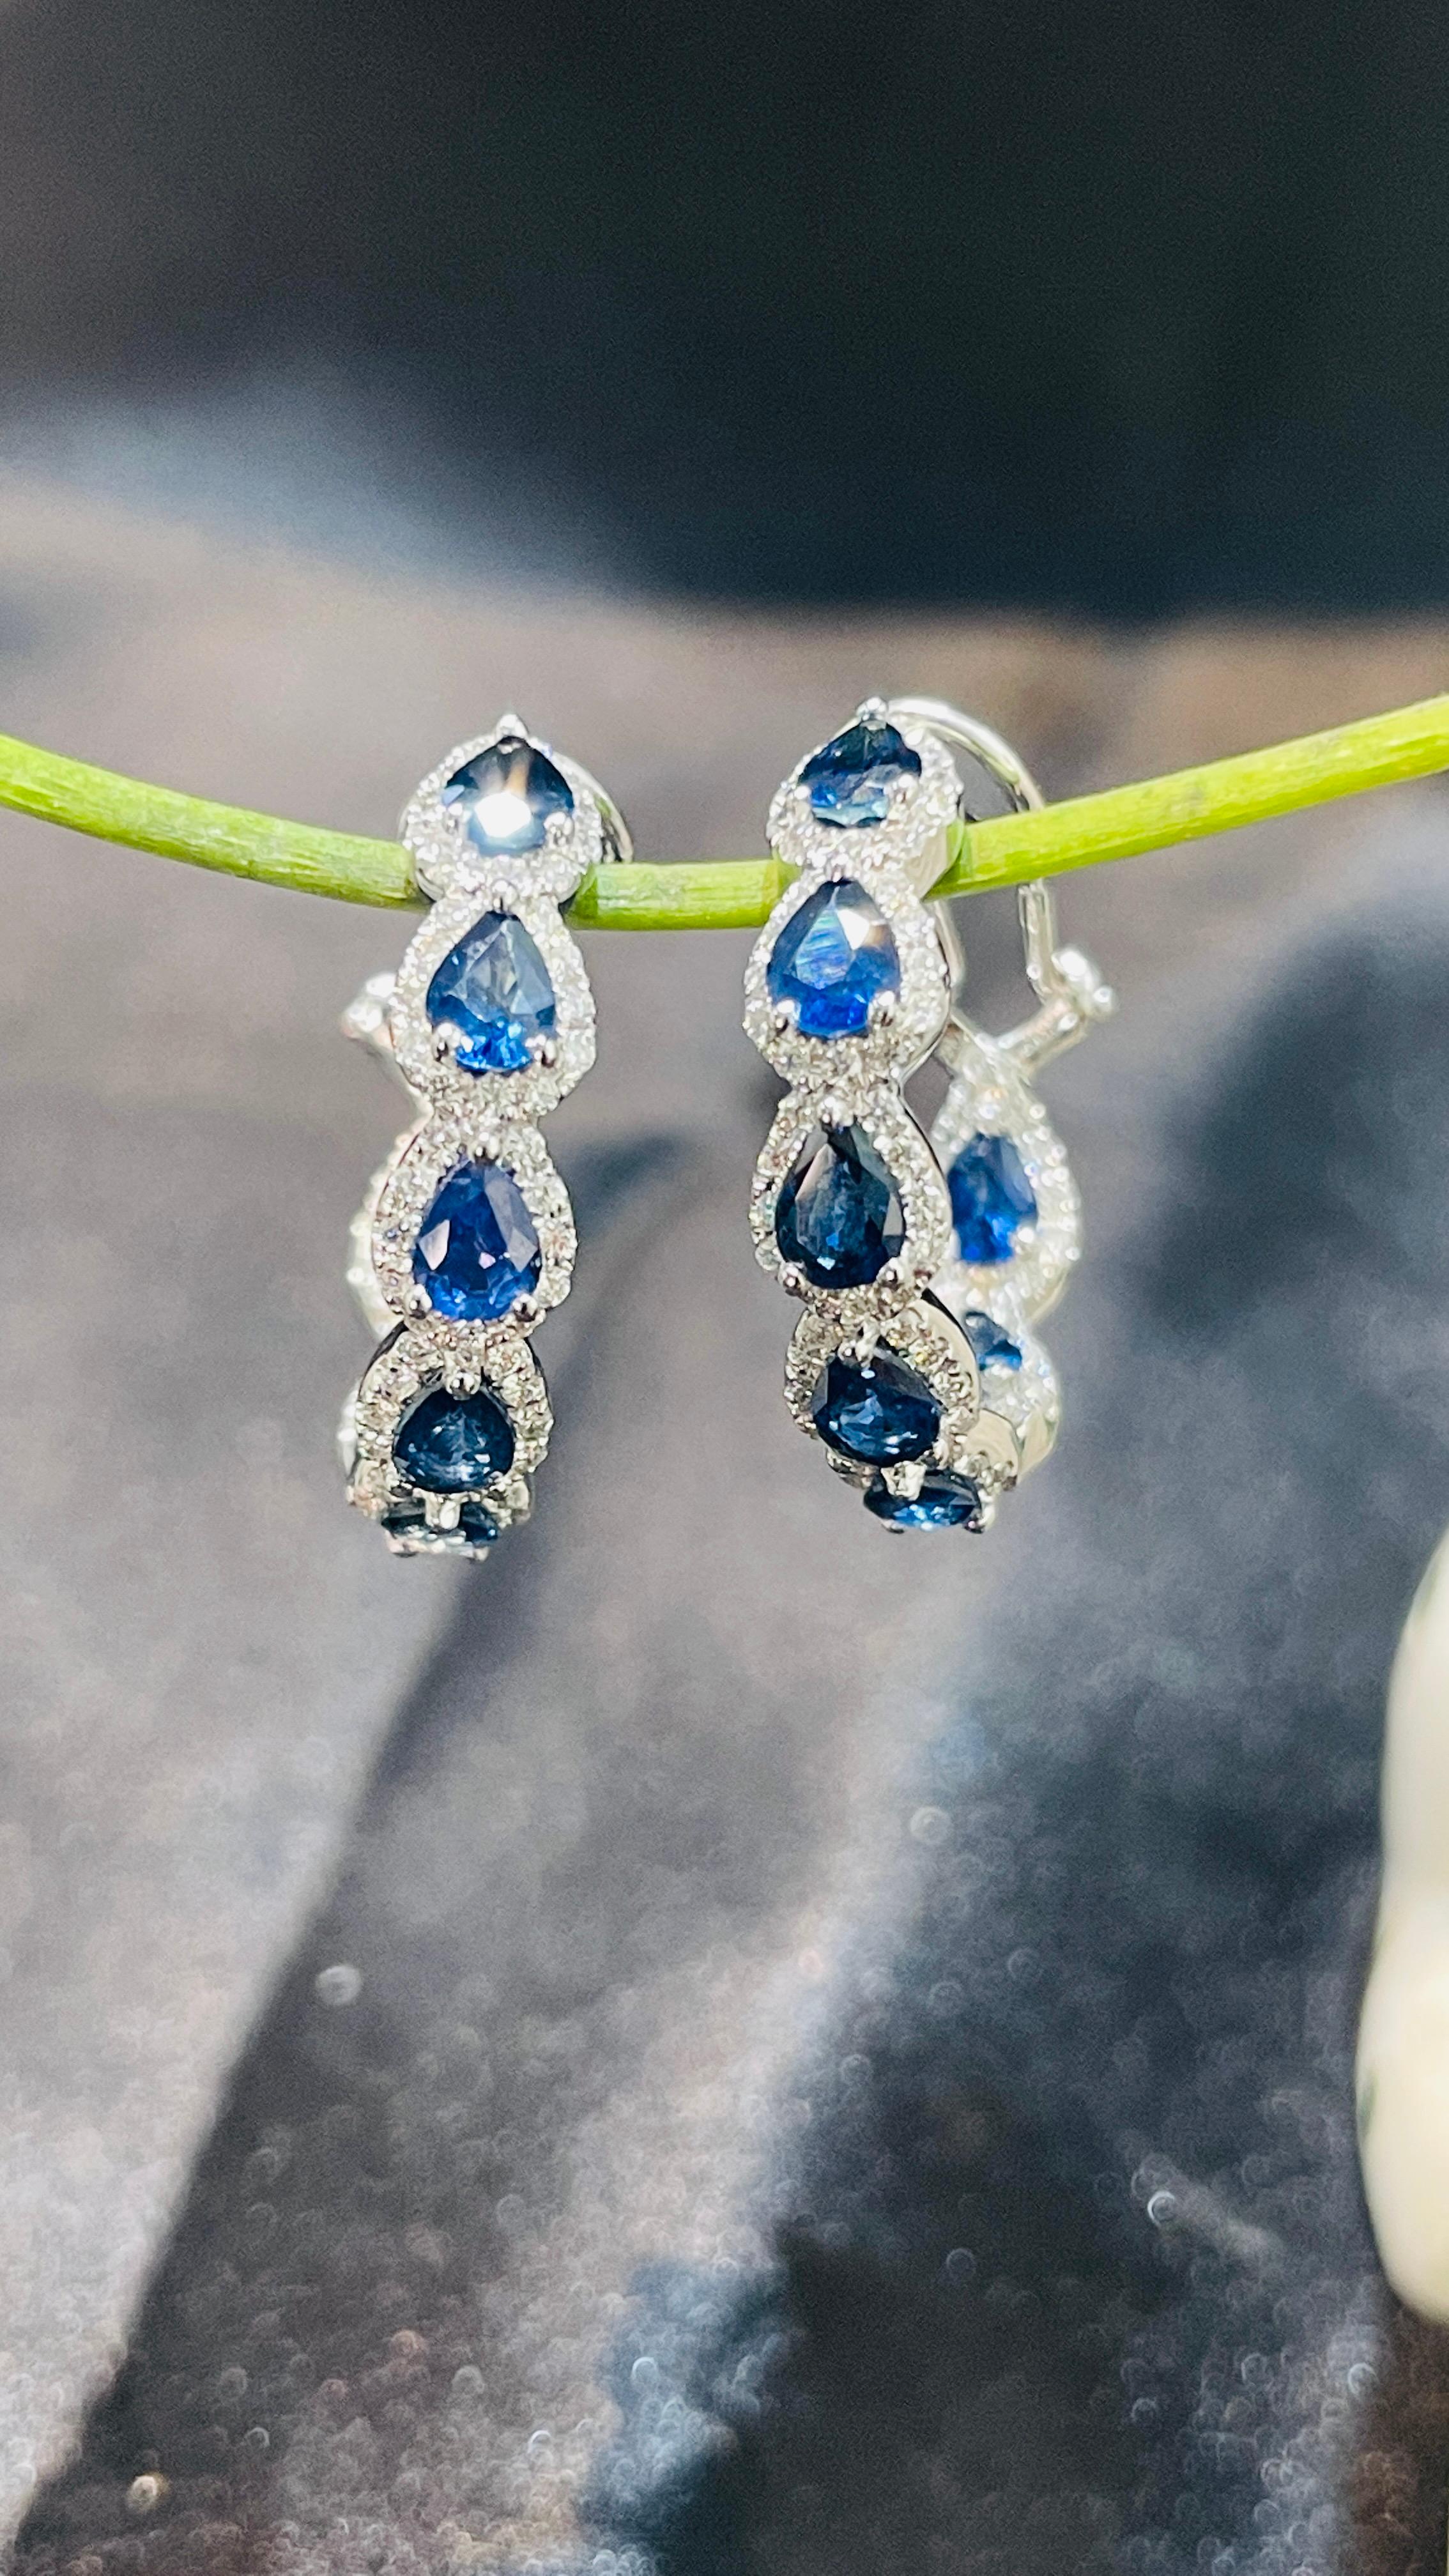 14k gold diamond hoop earring with blue sapphires.